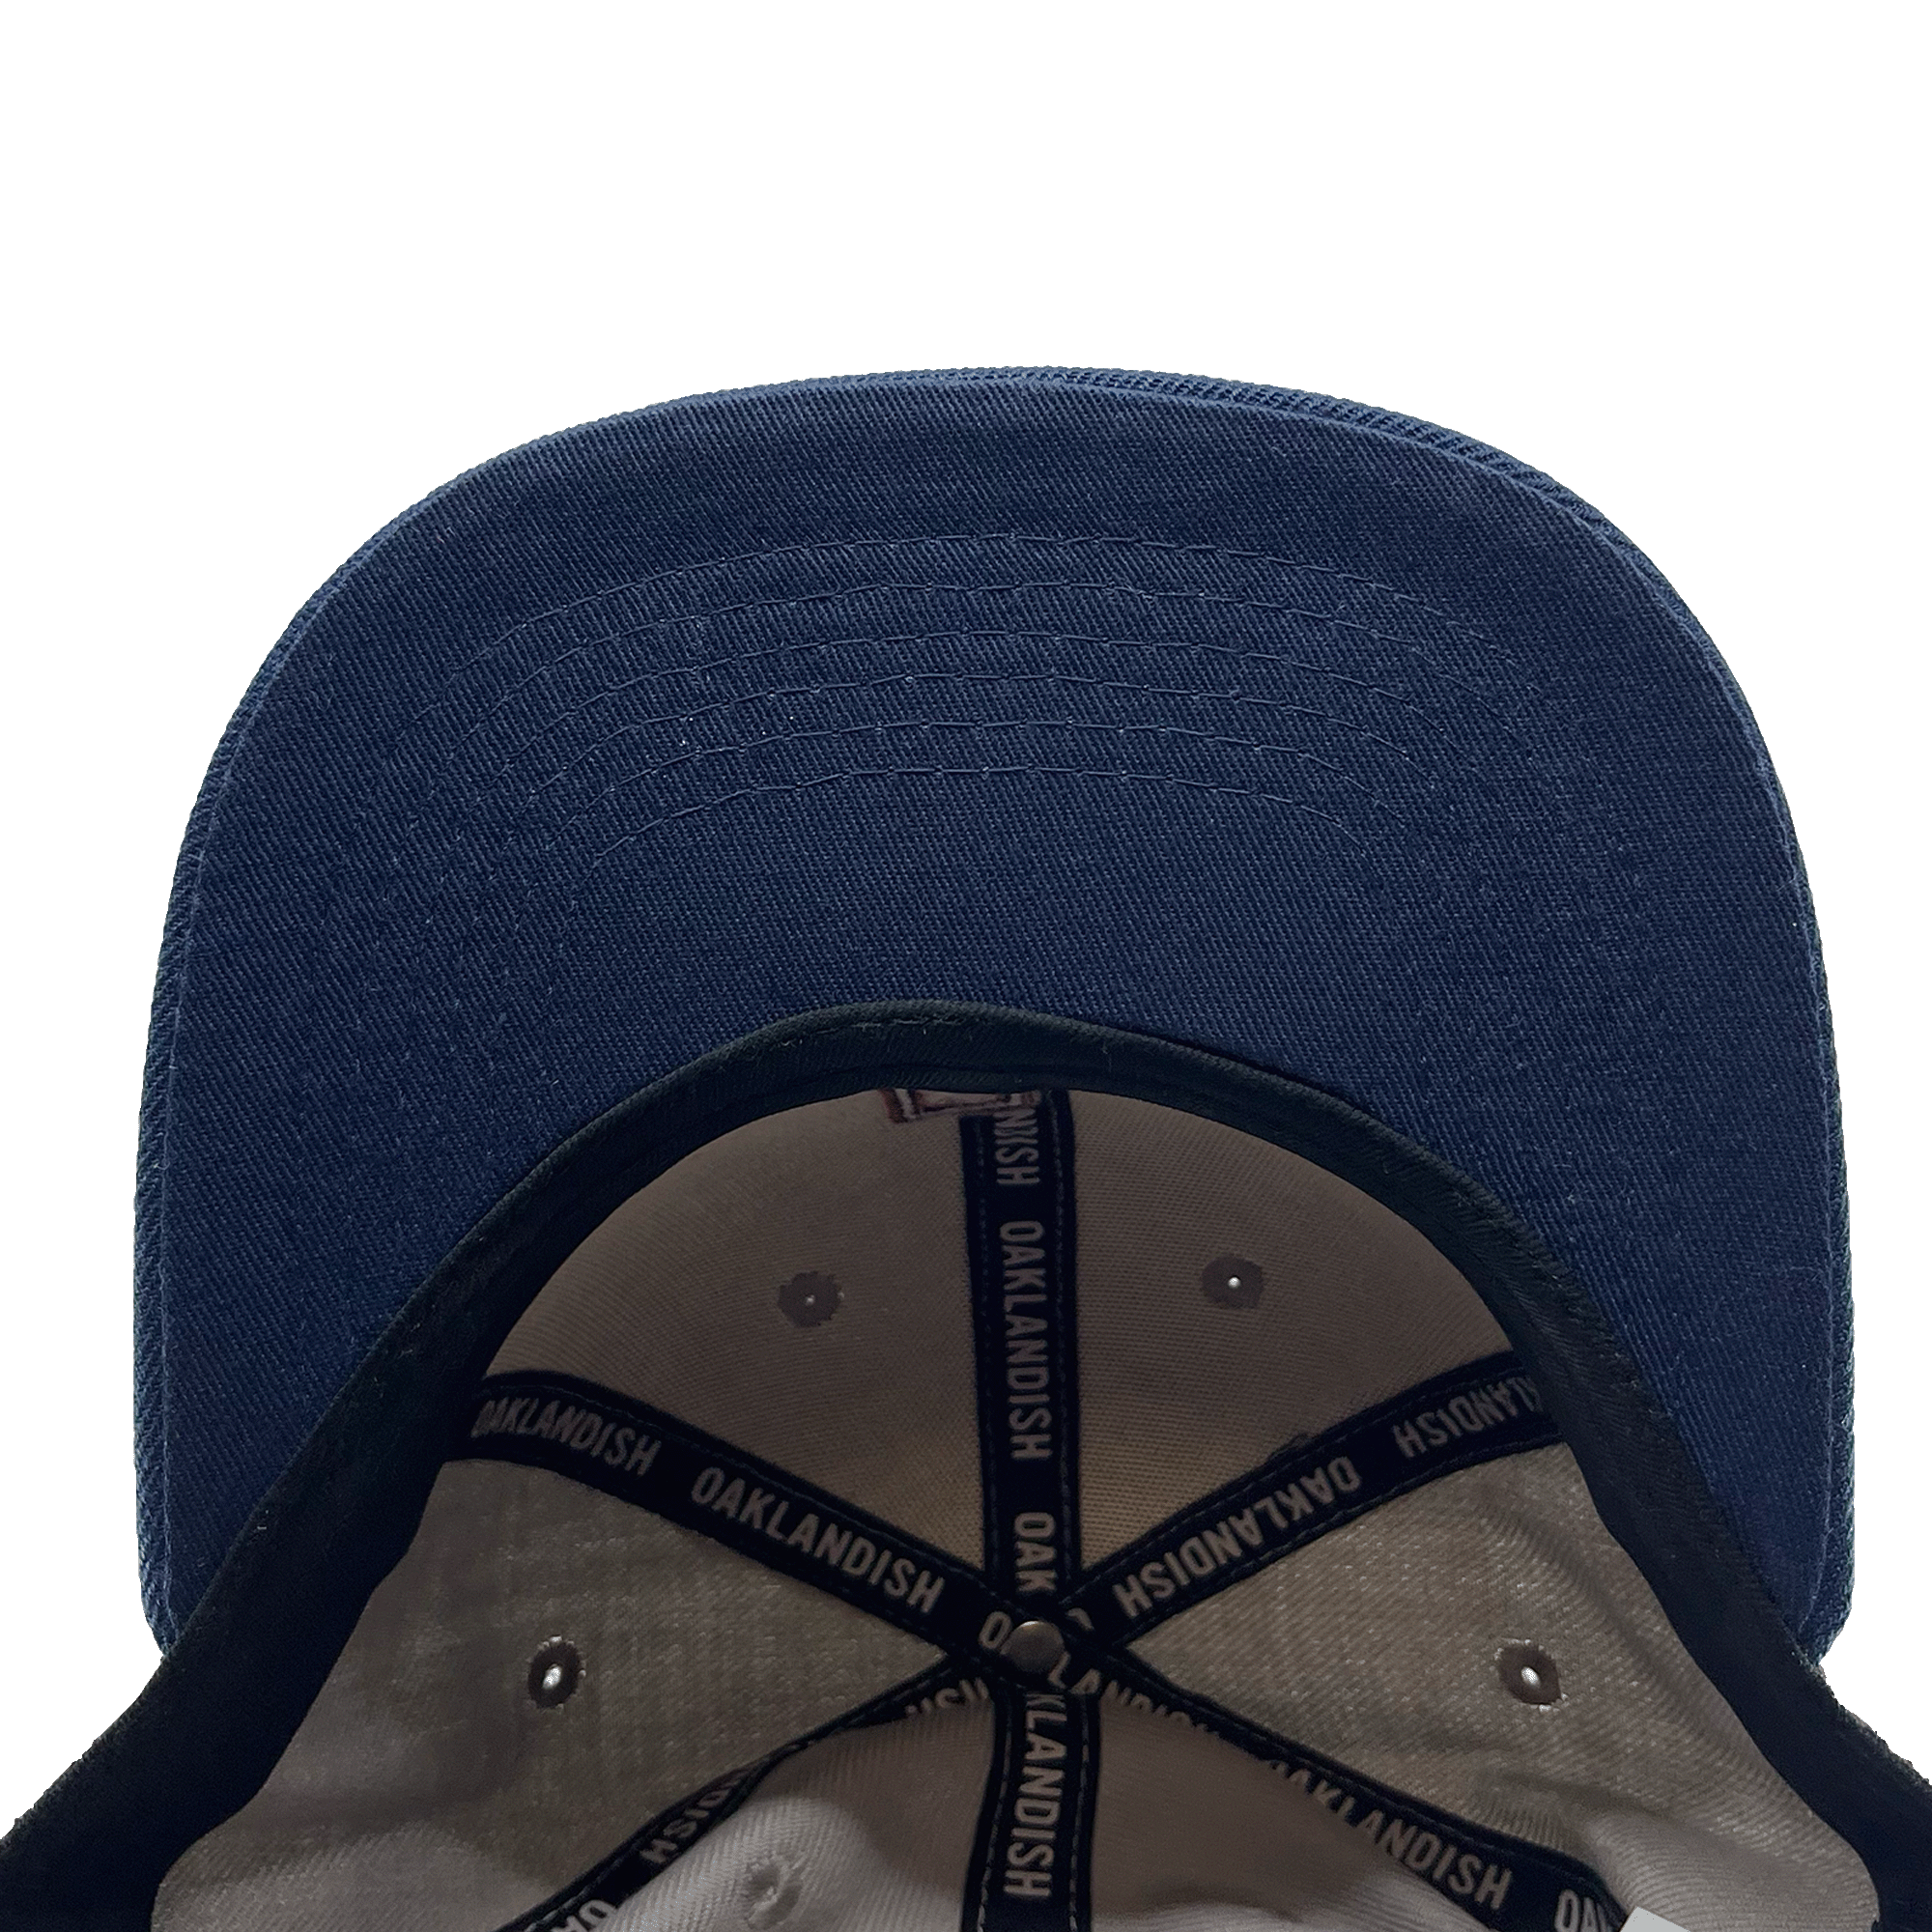 View of the underside of the bill of a navy cap with black striping and Oaklandish wordmark on repeat inside the crown.